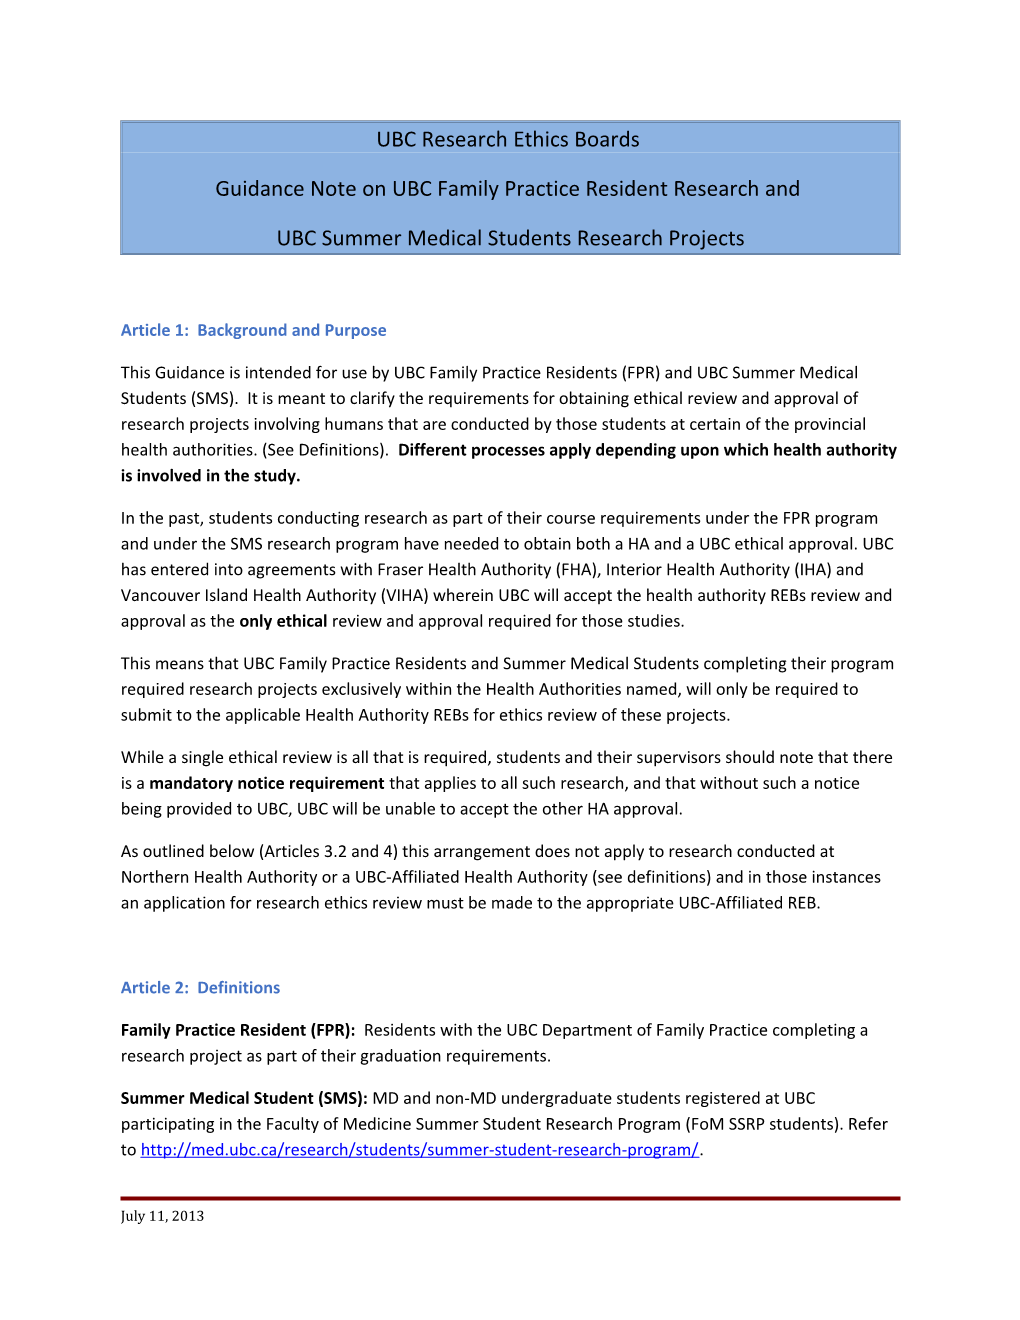 Guidance Note on UBC Family Practice Resident Research And